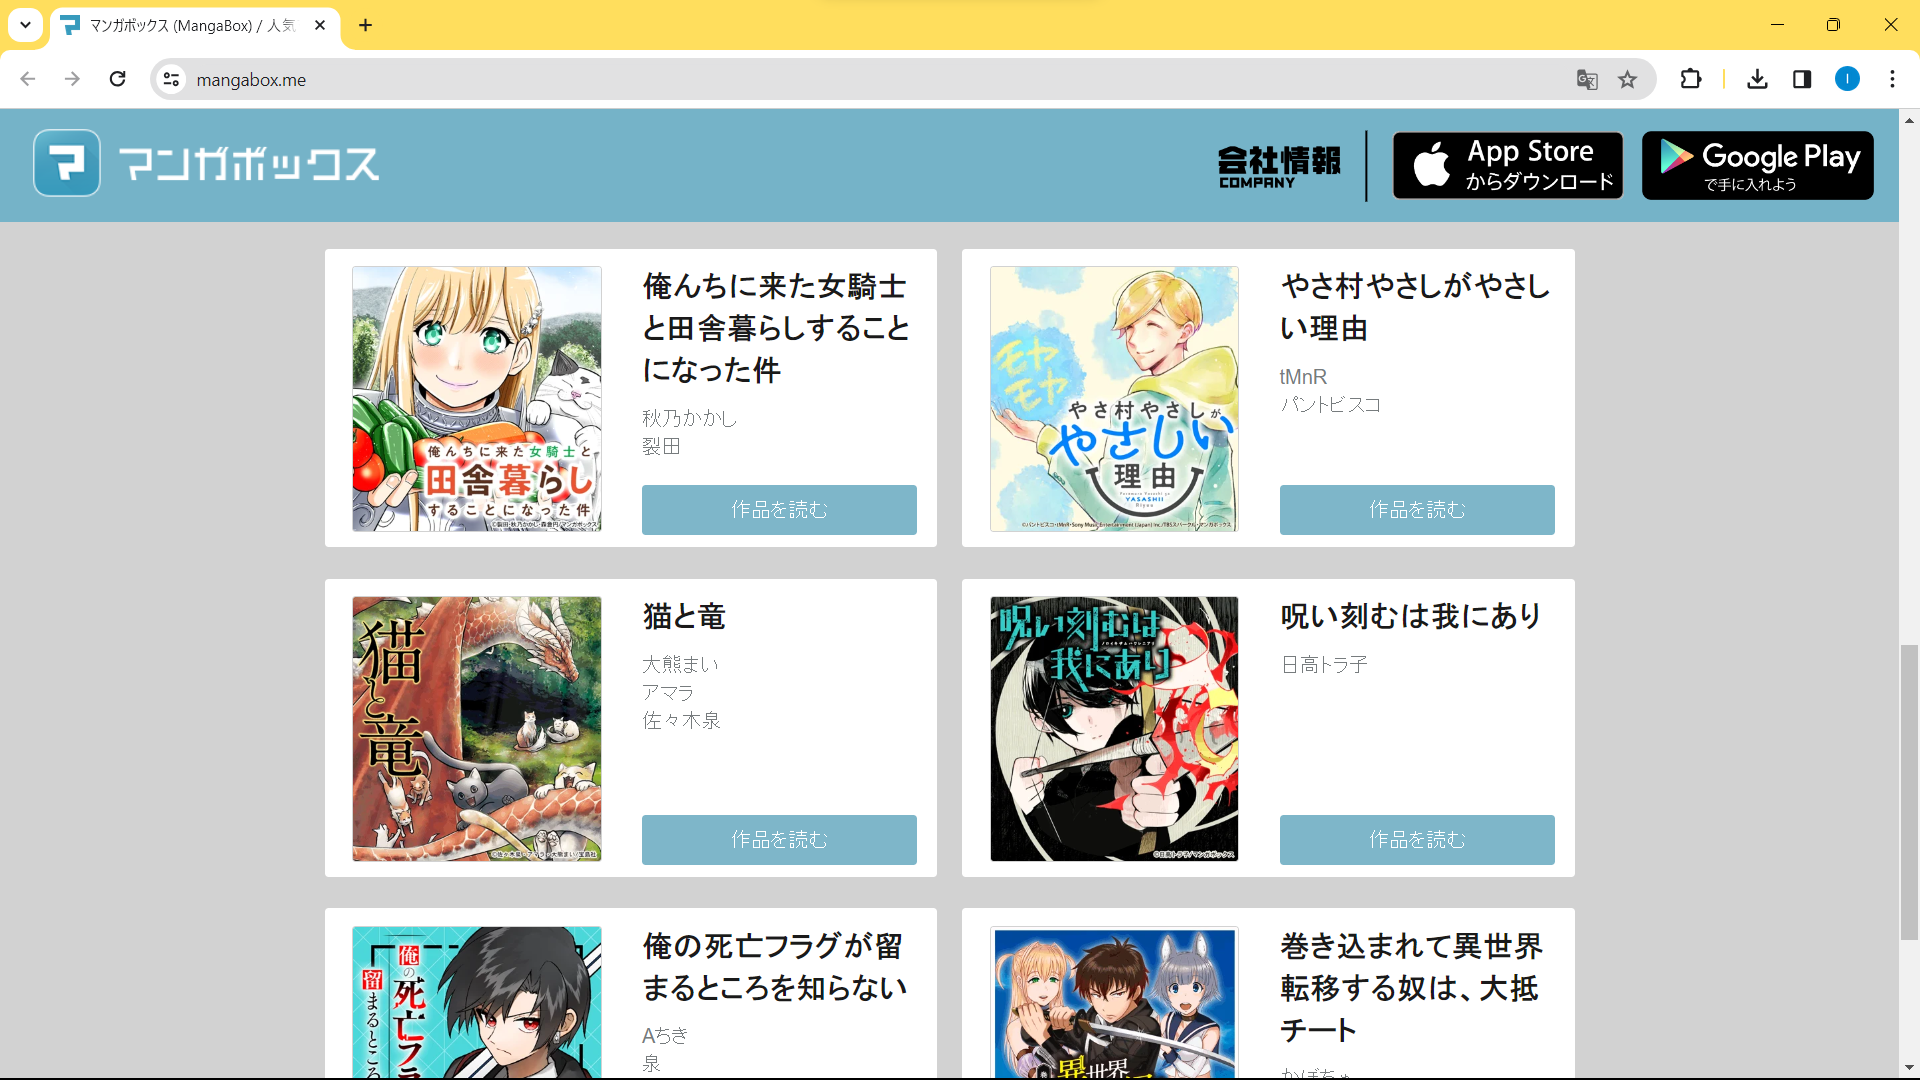 Mangabox home page: A colorful website with manga covers and titles. Explore the world of manga with just a click!